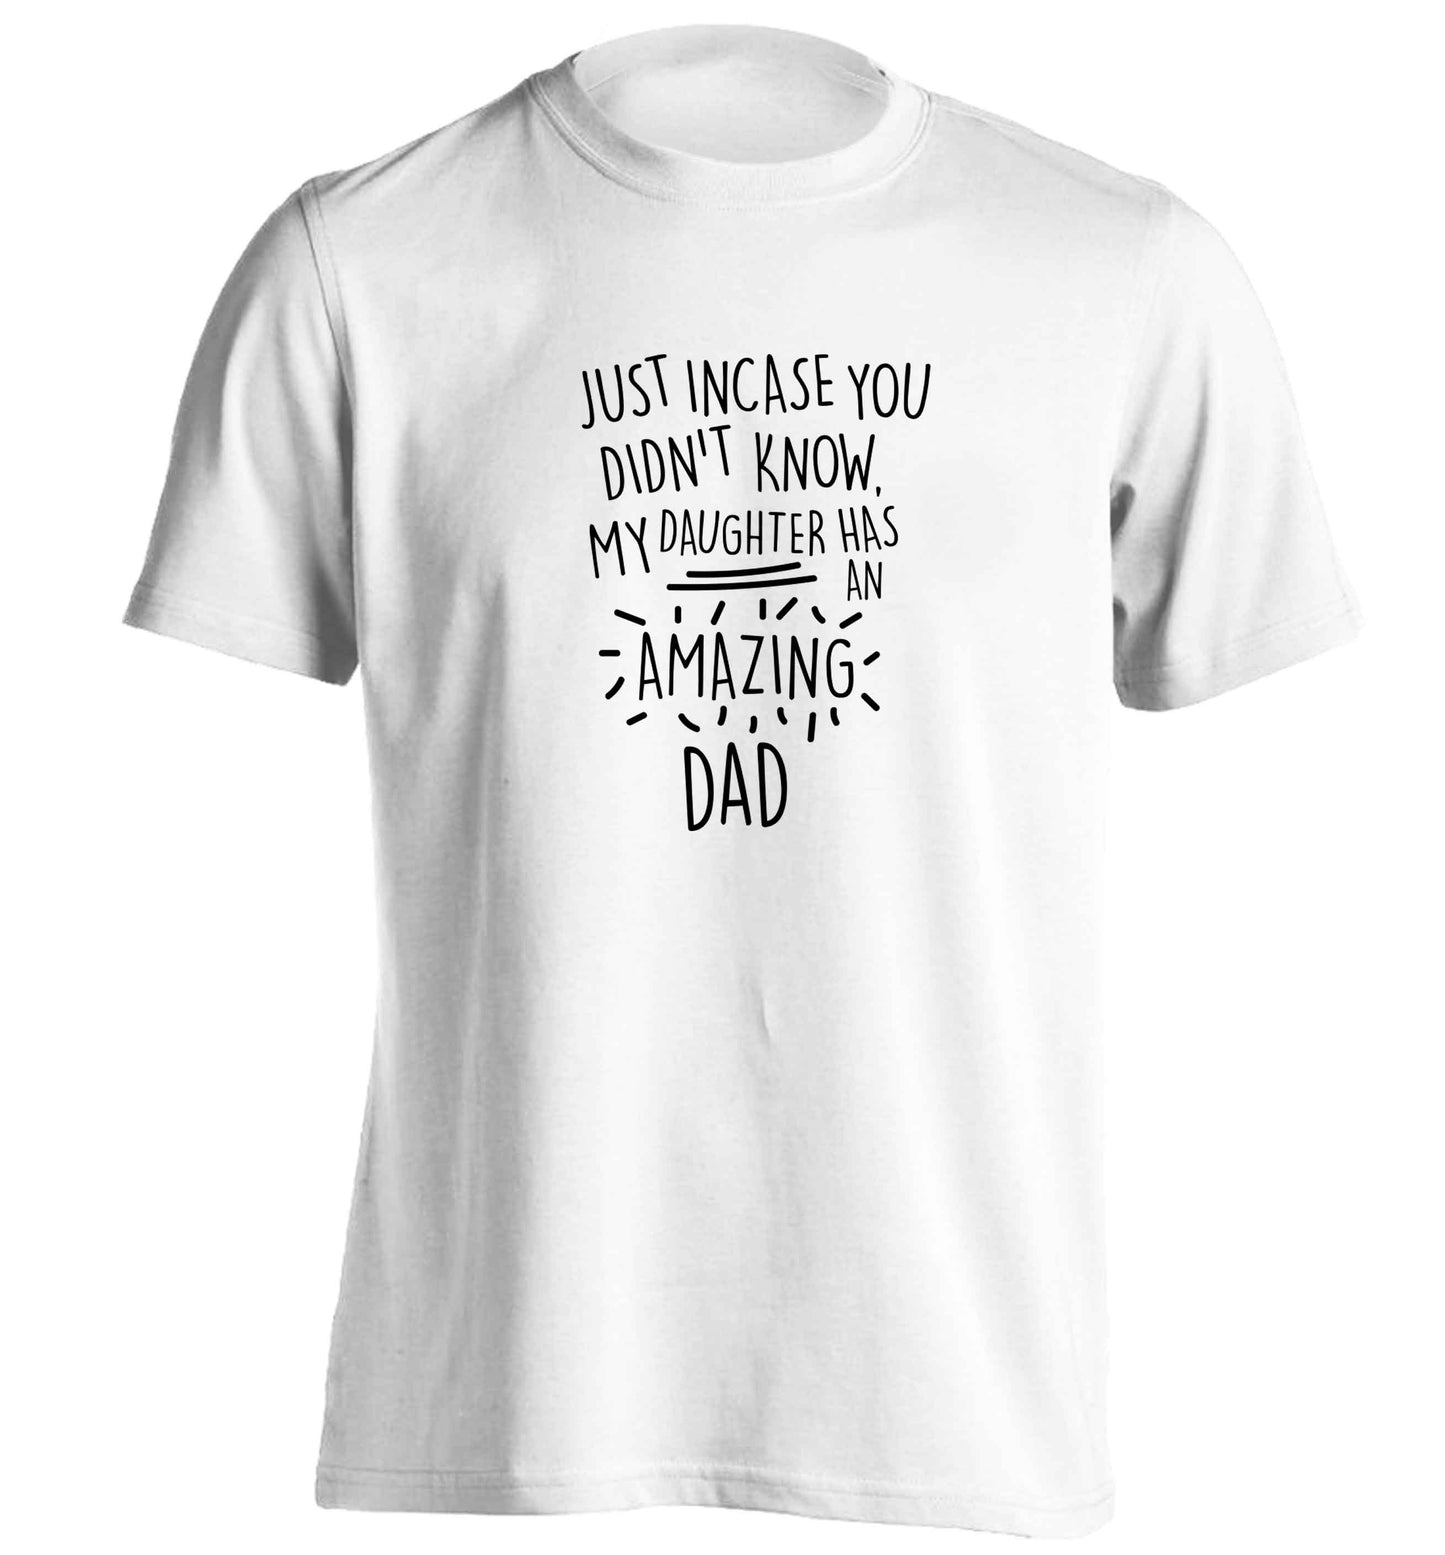 Just incase you didn't know my daughter has an amazing dad adults unisex white Tshirt 2XL